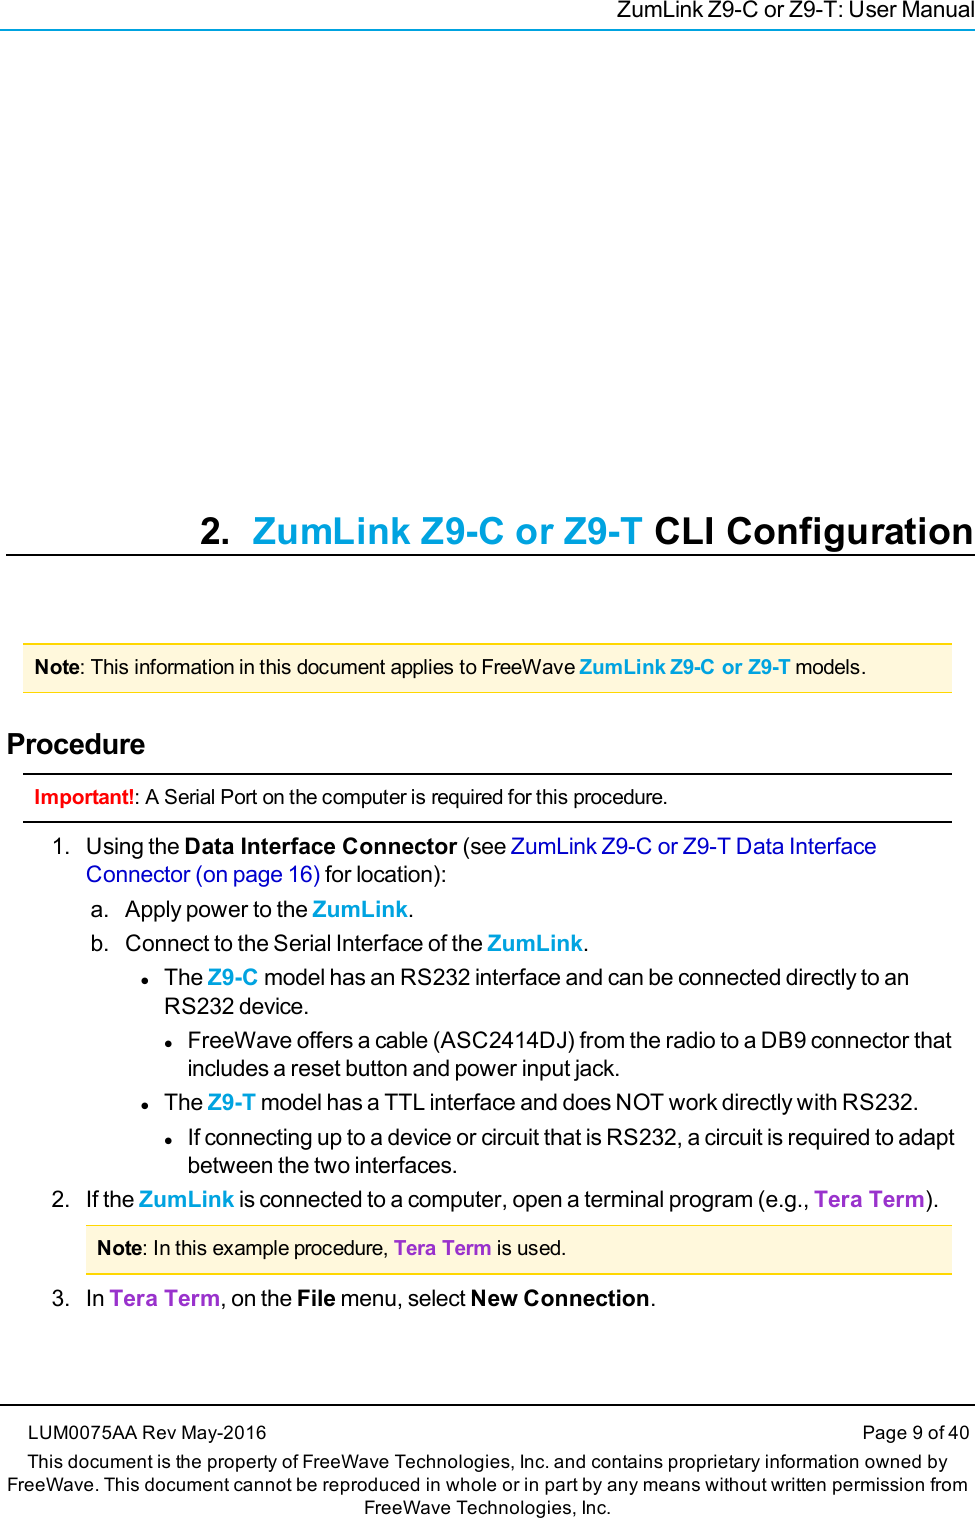 ZumLink Z9-C or Z9-T: User Manual2. ZumLink Z9-C or Z9-T CLI ConfigurationNote: This information in this document applies to FreeWave ZumLink Z9-C or Z9-T models.ProcedureImportant!: A Serial Port on the computer is required for this procedure.1. Using the Data Interface Connector (see ZumLink Z9-C or Z9-T Data InterfaceConnector (on page 16) for location):a. Apply power to the ZumLink.b. Connect to the Serial Interface of the ZumLink.lThe Z9-C model has an RS232 interface and can be connected directly to anRS232 device.lFreeWave offers a cable (ASC2414DJ) from the radio to a DB9 connector thatincludes a reset button and power input jack.lThe Z9-T model has a TTL interface and does NOT work directly with RS232.lIf connecting up to a device or circuit that is RS232, a circuit is required to adaptbetween the two interfaces.2. If the ZumLink is connected to a computer, open a terminal program (e.g., Tera Term).Note: In this example procedure, Tera Term is used.3. In Tera Term, on the File menu, select New Connection.LUM0075AA Rev May-2016 Page 9 of 40This document is the property of FreeWave Technologies, Inc. and contains proprietary information owned byFreeWave. This document cannot be reproduced in whole or in part by any means without written permission fromFreeWave Technologies, Inc.